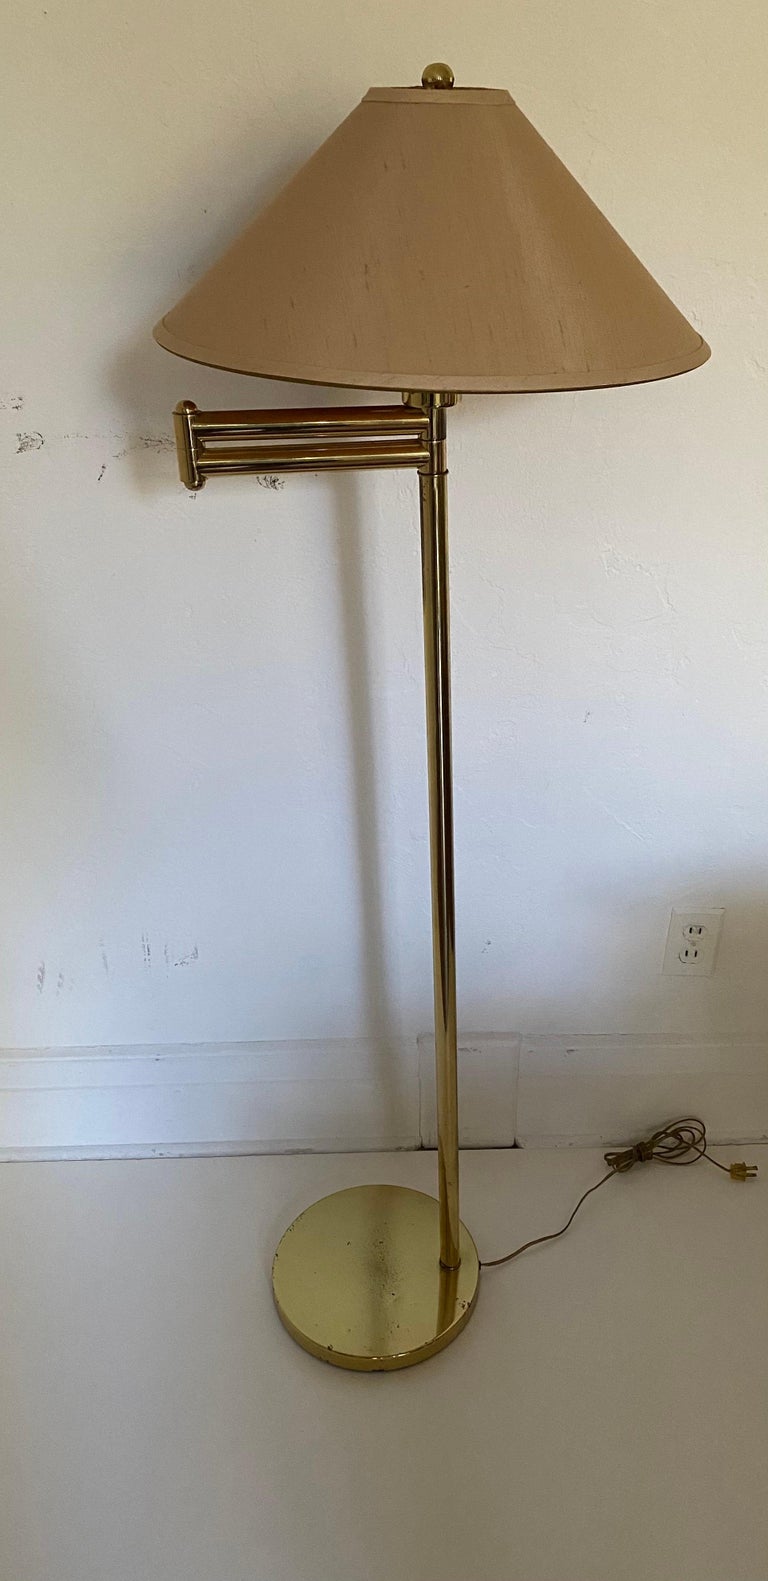 A vintage brass floor lamp with adjustable swing arm by Frederick Cooper.

Includes original beige silk shade and finial, also by Frederick Cooper.

Made in USA in the 1970s/1980s.

Signed on underside of base with stamped “FC6” mark; signed